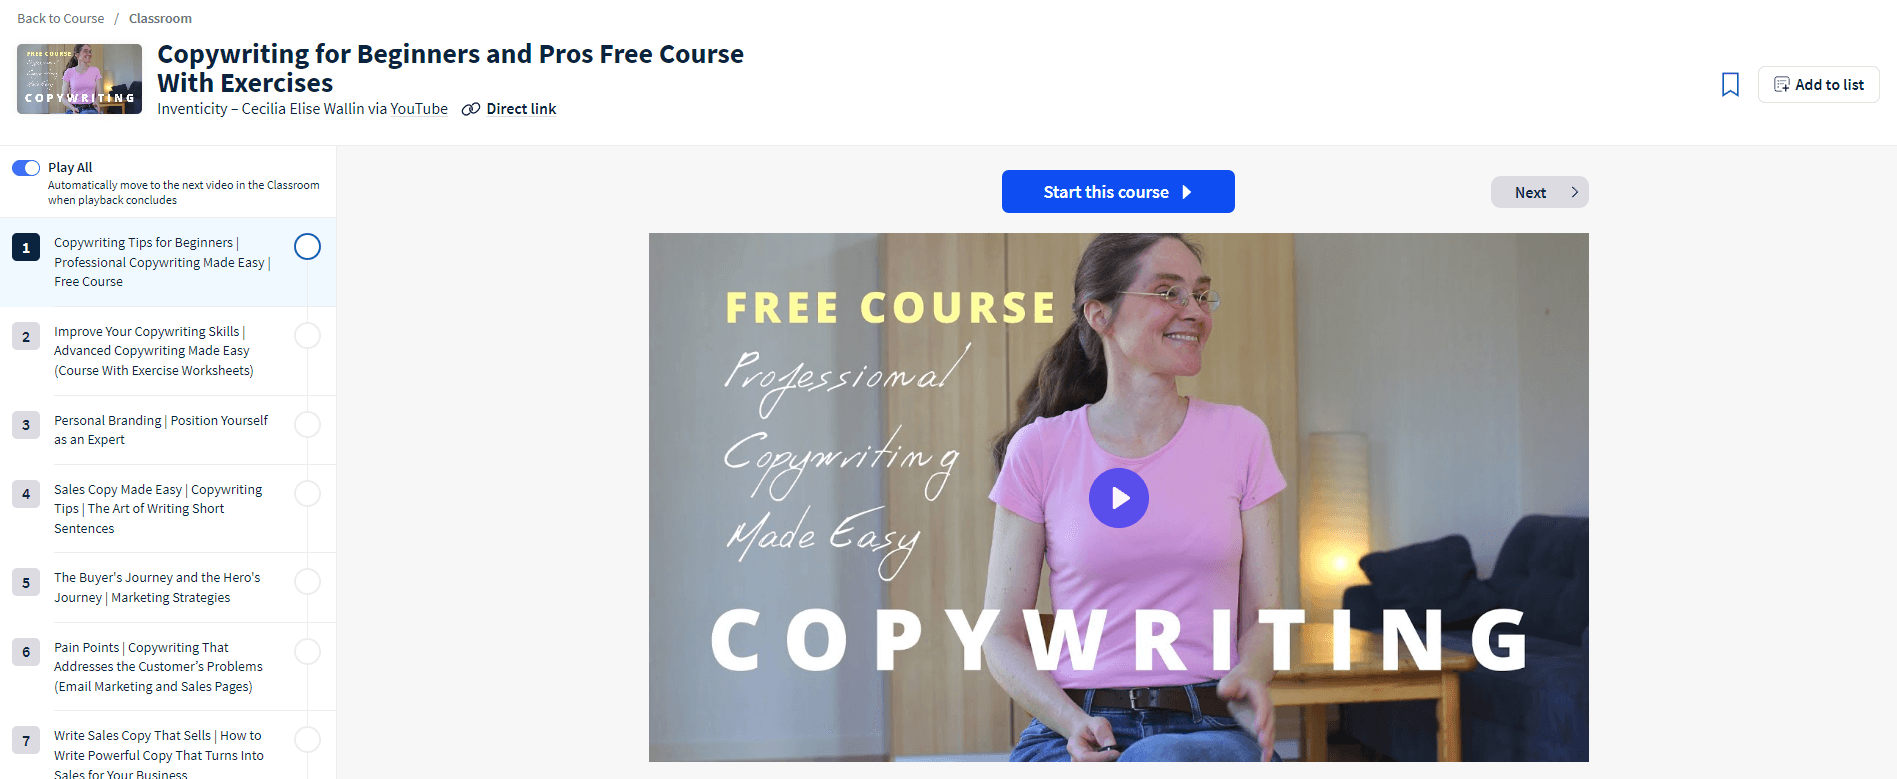 Copywriting for Beginners and Pros is among the best free writing courses online.